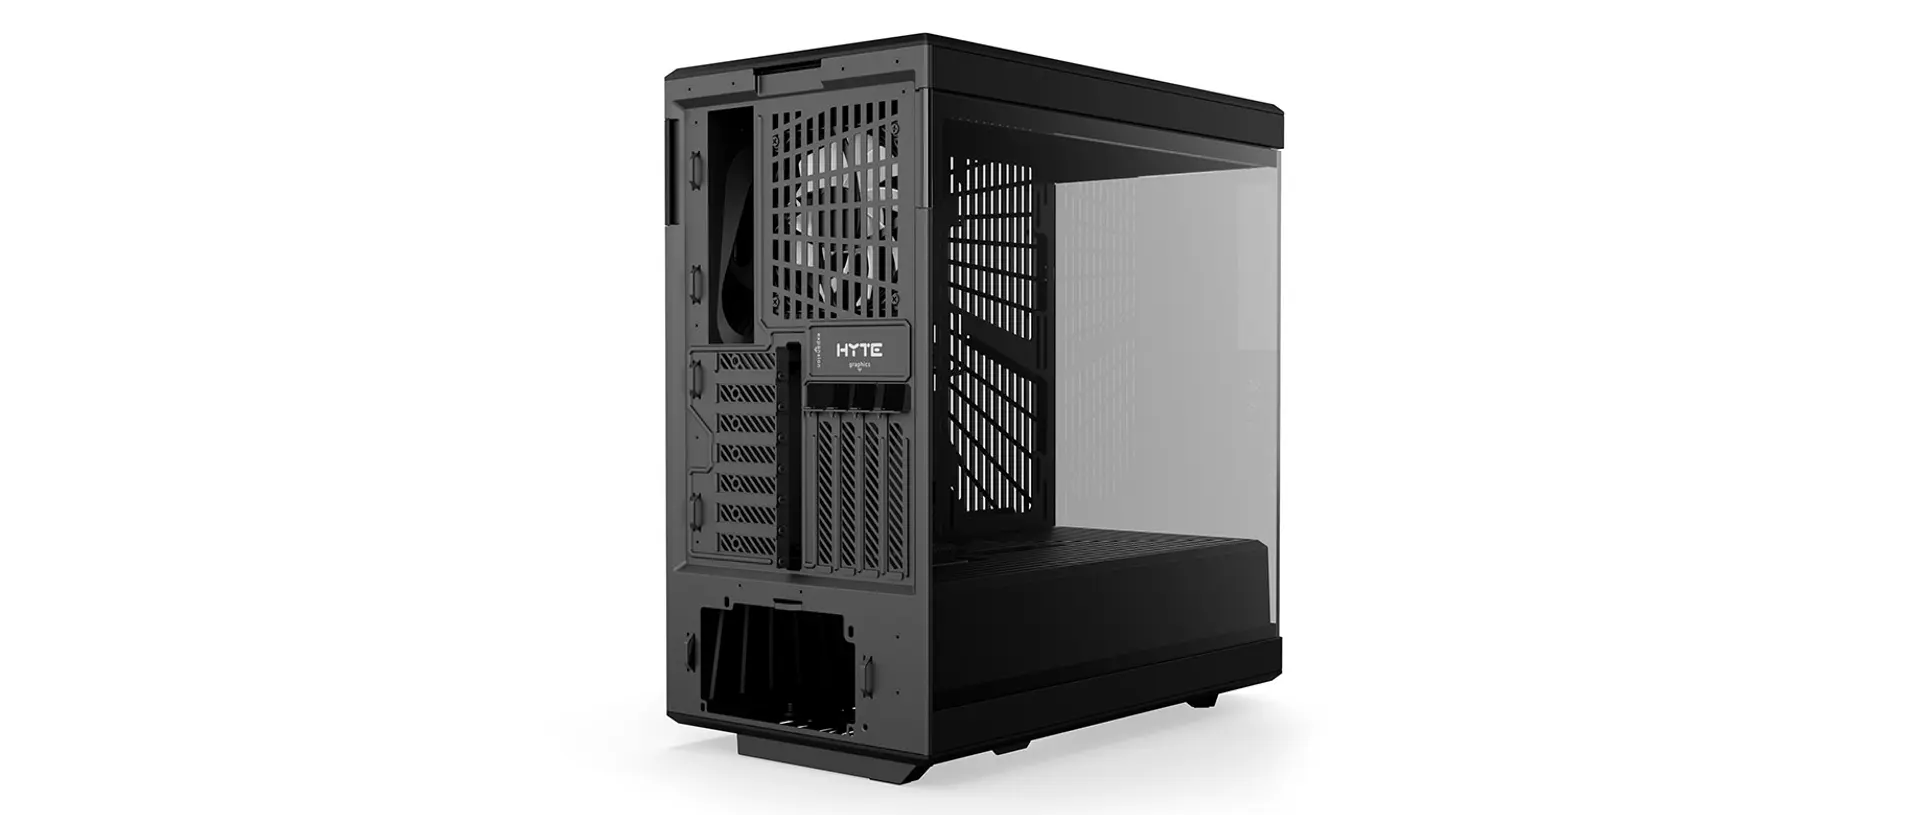 HYTE Y40 Black Miditower - Panoramic Glass Veil, included PCIe 4.0 riser cable, 2 included fans HYTE